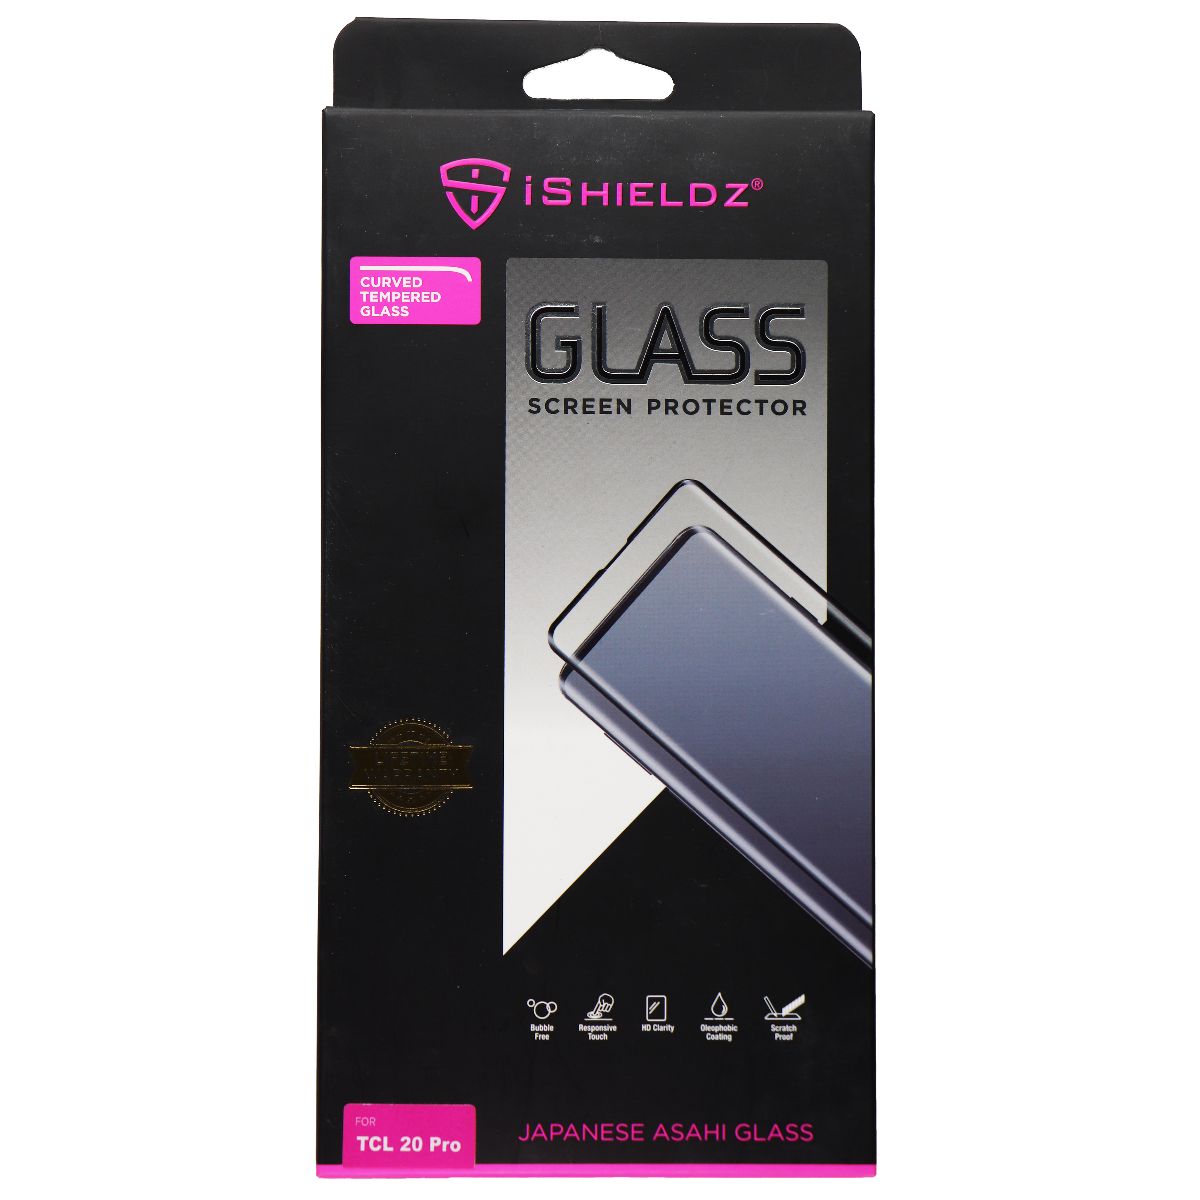 iShieldz Curved Tempered Glass Screen Protector for TCL 20 Pro - Clear